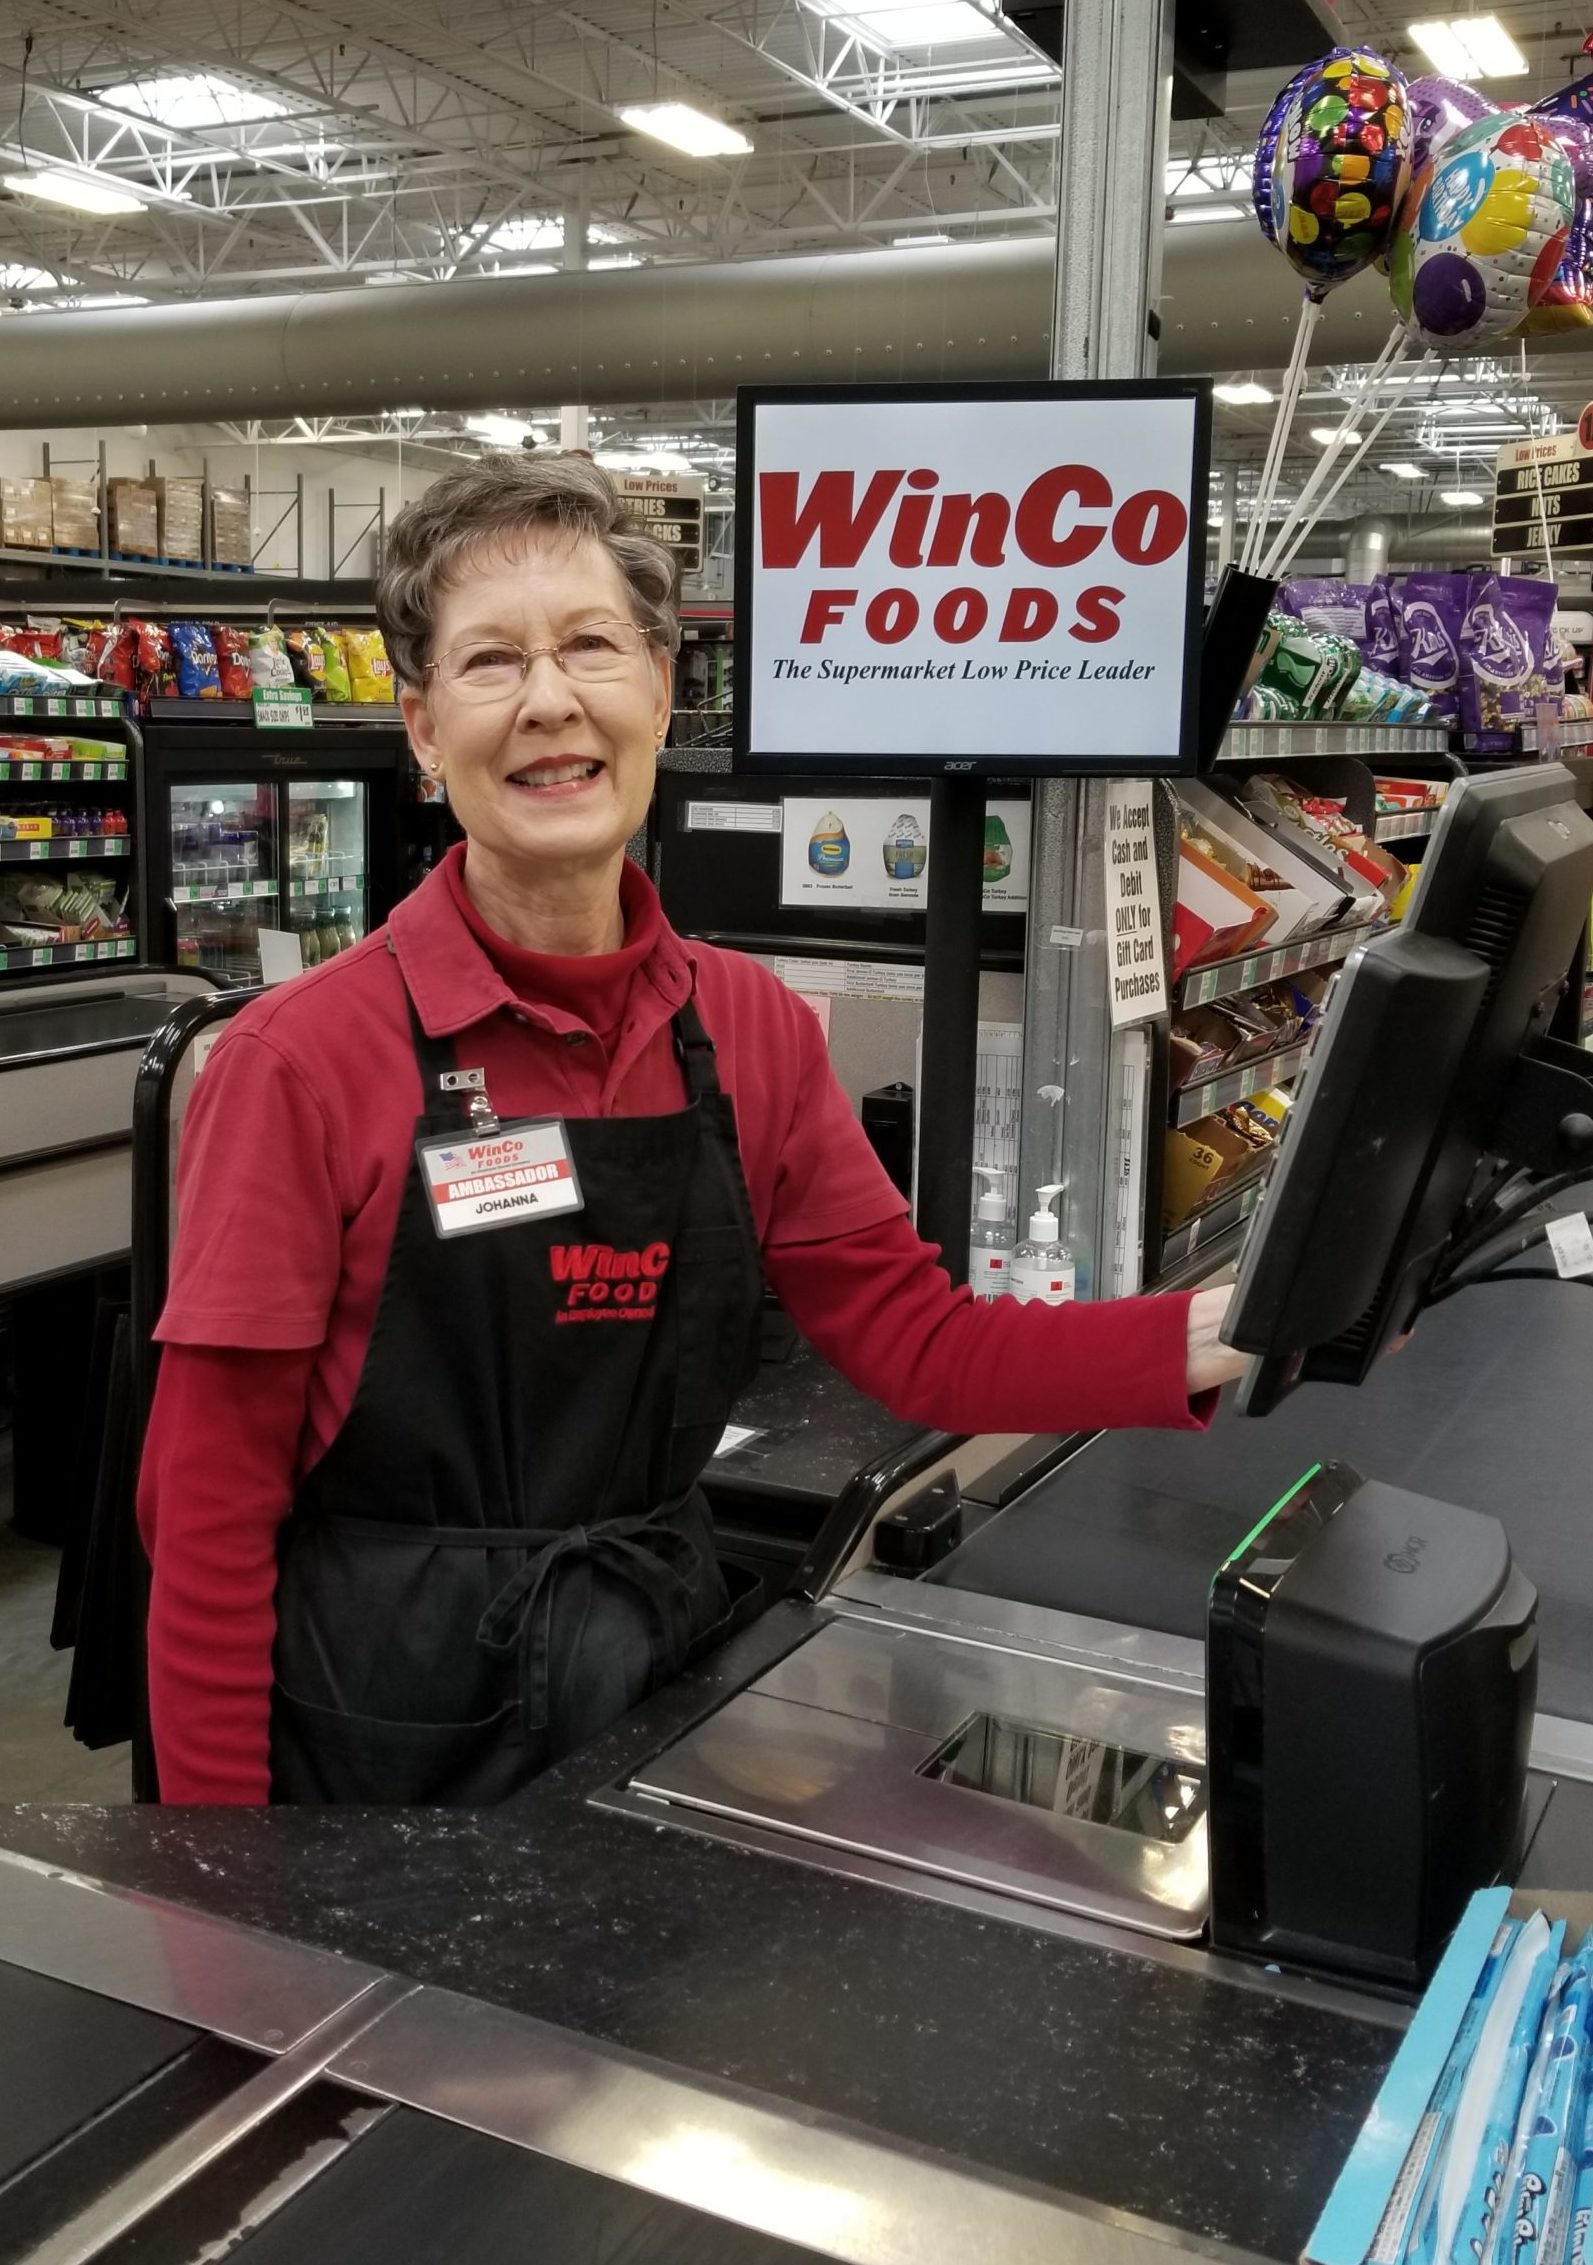 Smiling WinCo employee at the register